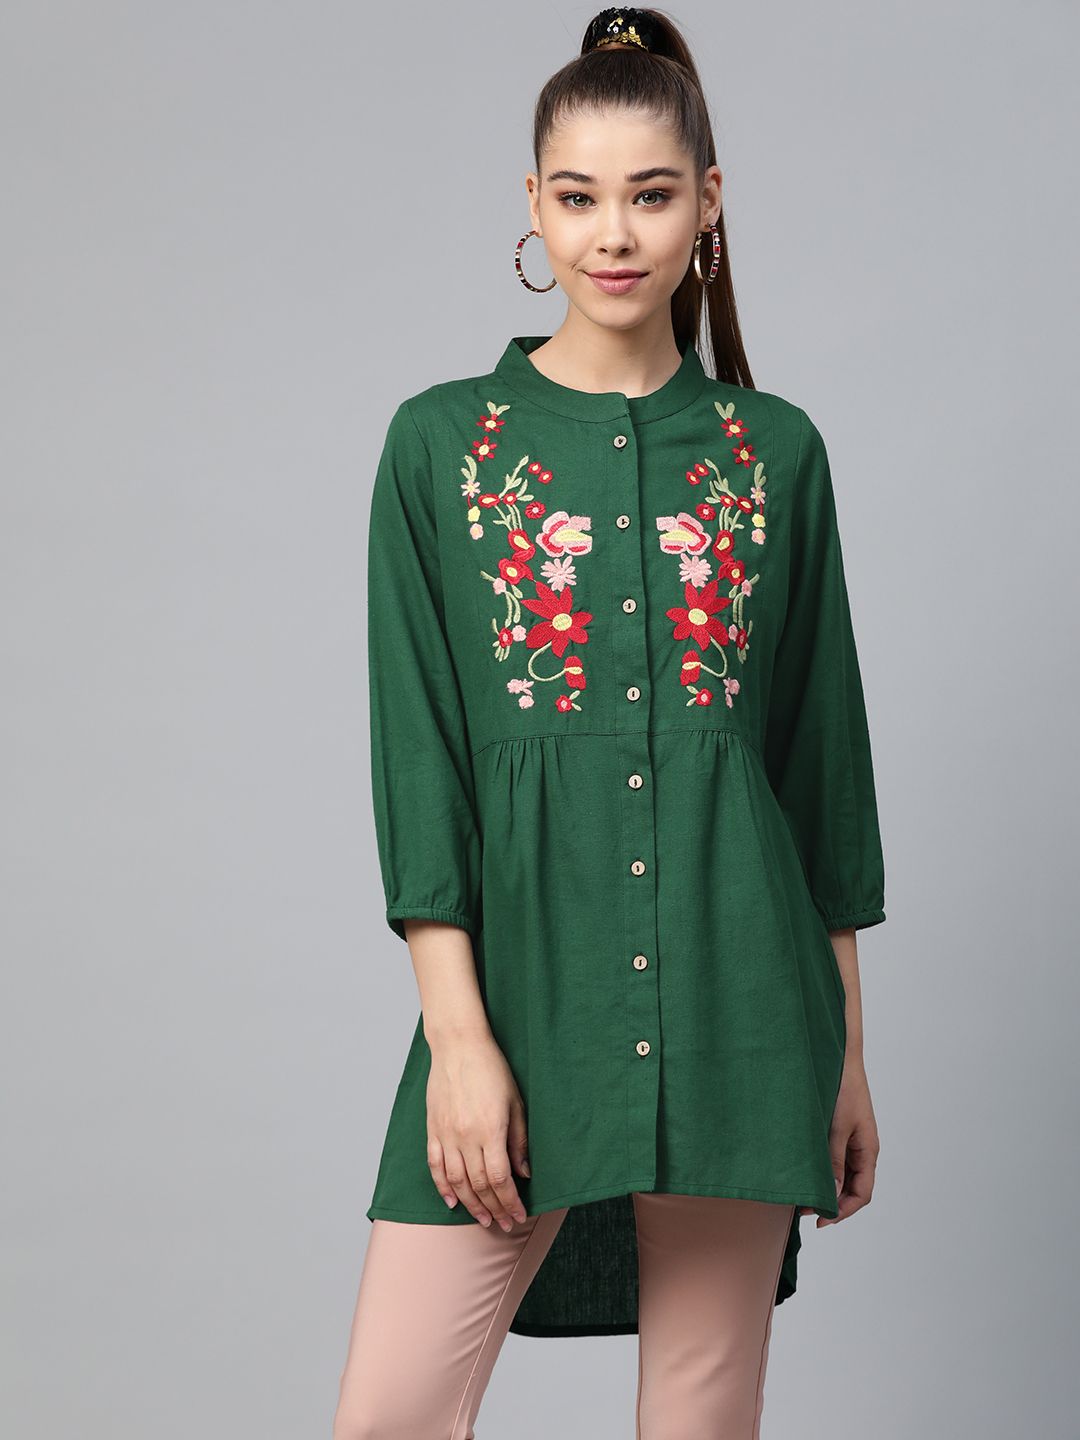 Shae by SASSAFRAS Women Green & Red Embroidered High-Low Tunic Price in India